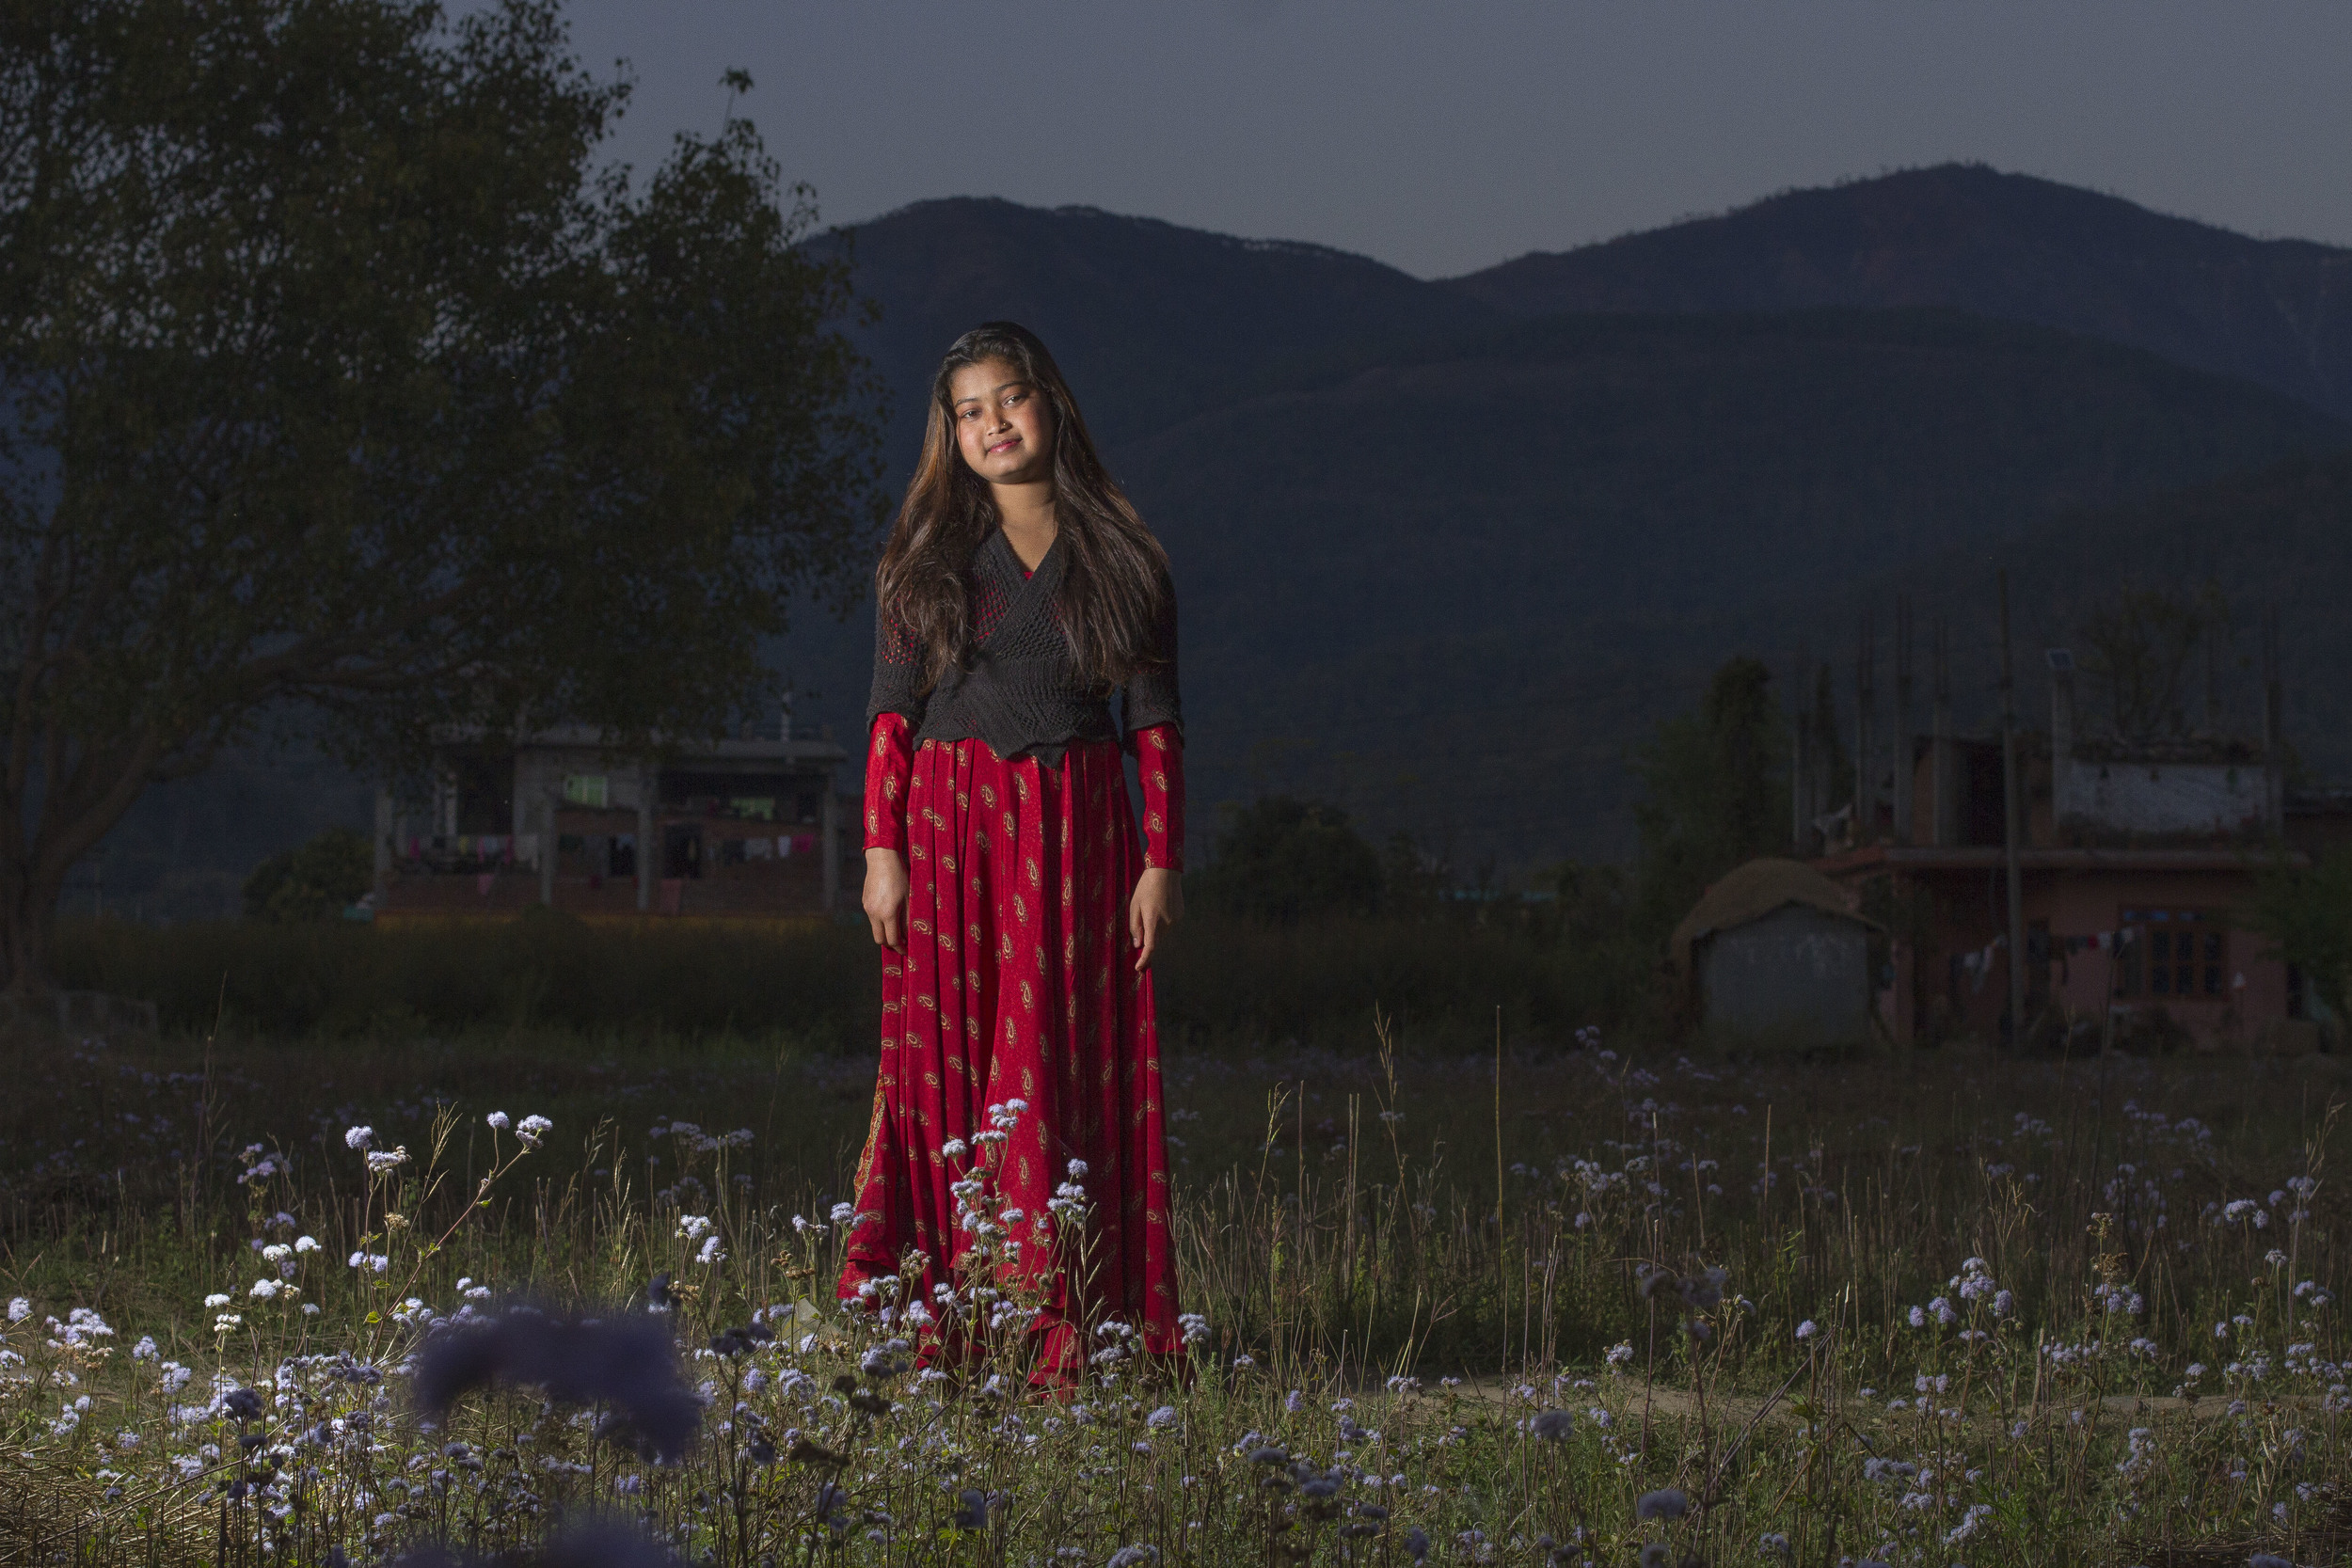  She's the First Scholar and poet Deepa N. poses in a field near her school in Nepal, March 2015. (photo by Kate Lord) 